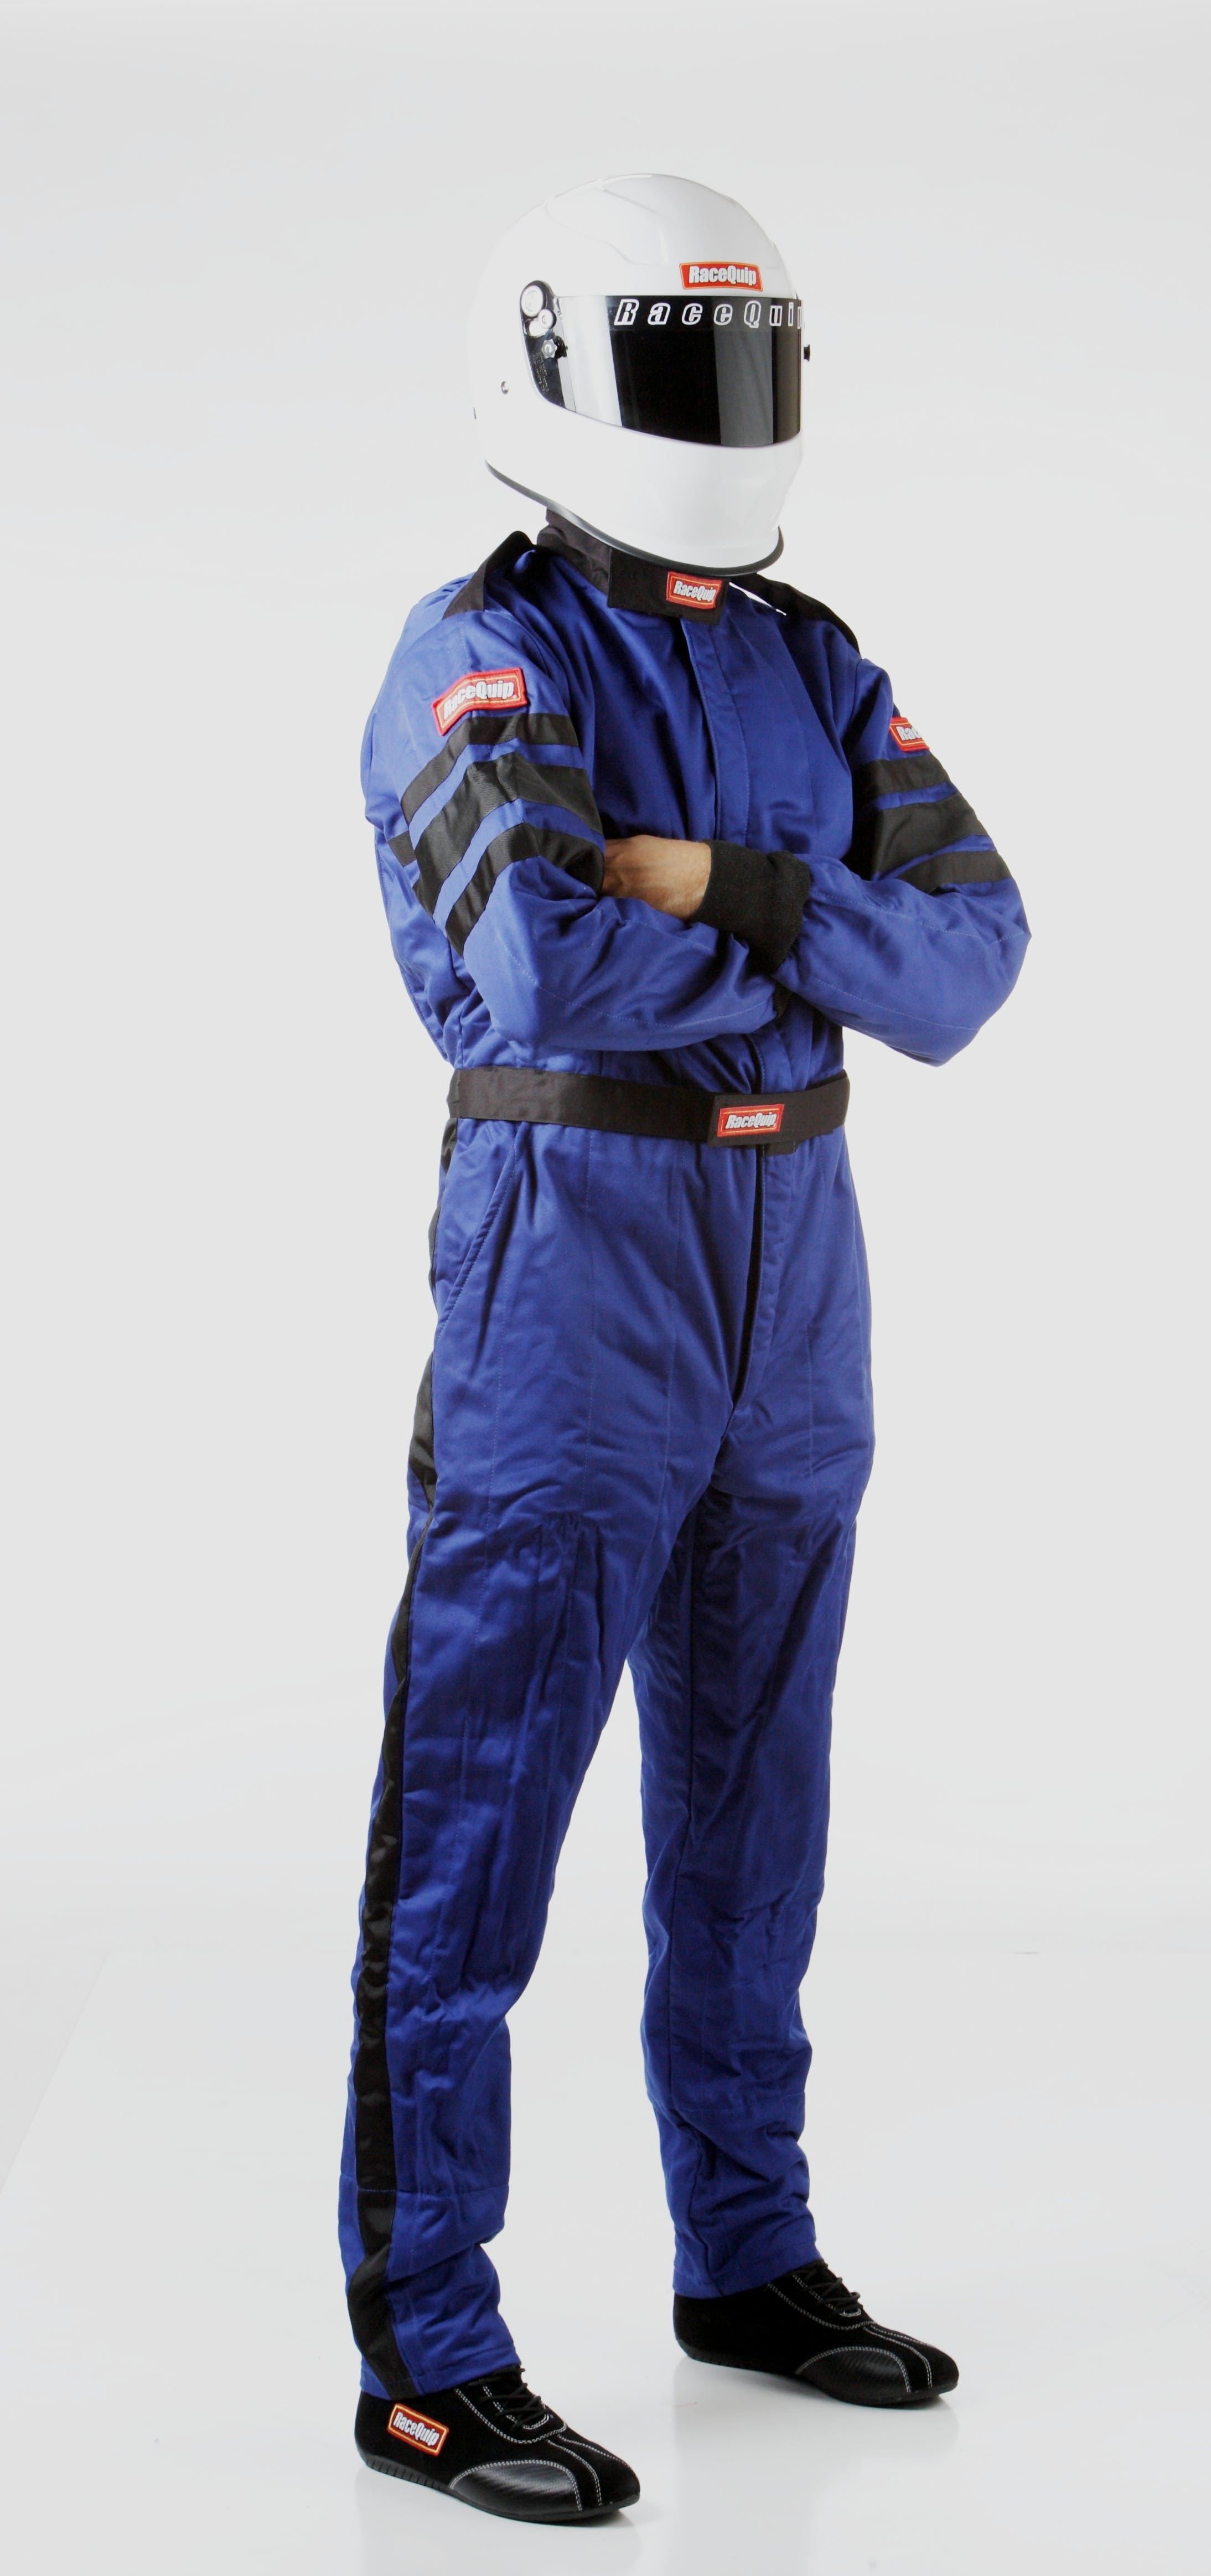 RaceQuip 120026 SFI-5 Pyrovatex One-Piece Multi-Layer Racing Fire Suit (Blue, X-Large)